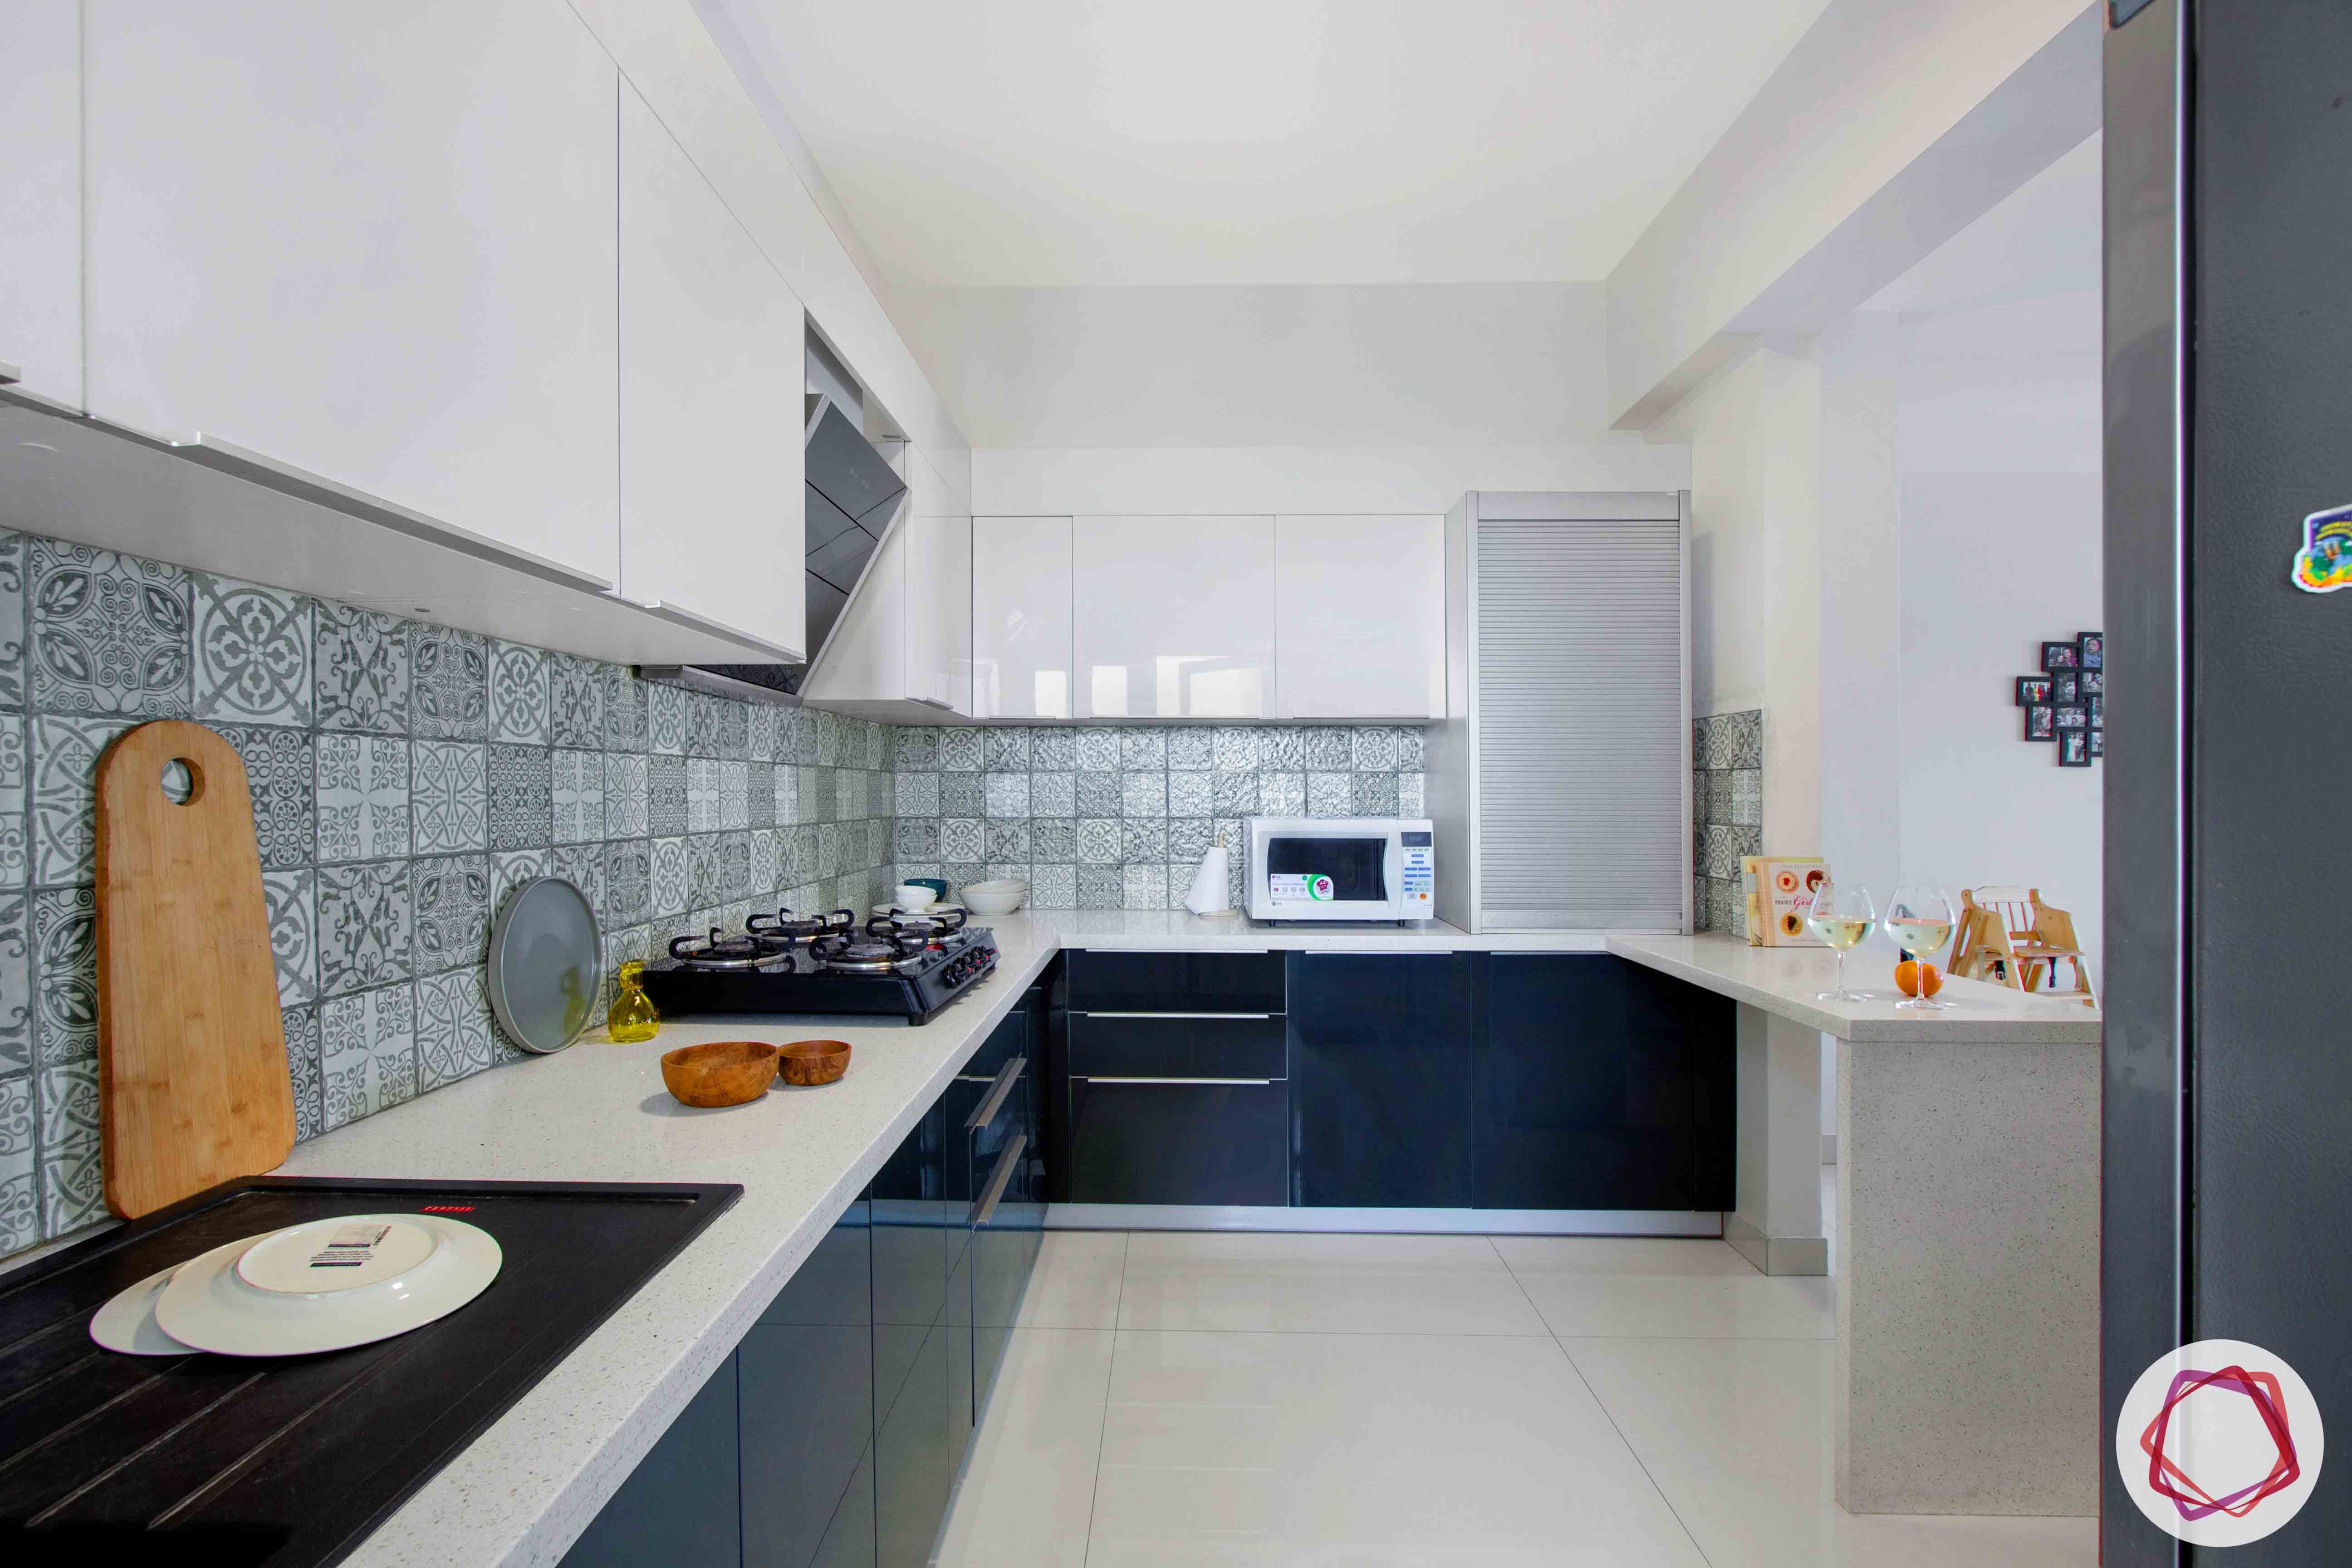 dnr atmosphere-two toned kitchen design-grey and white kitchen